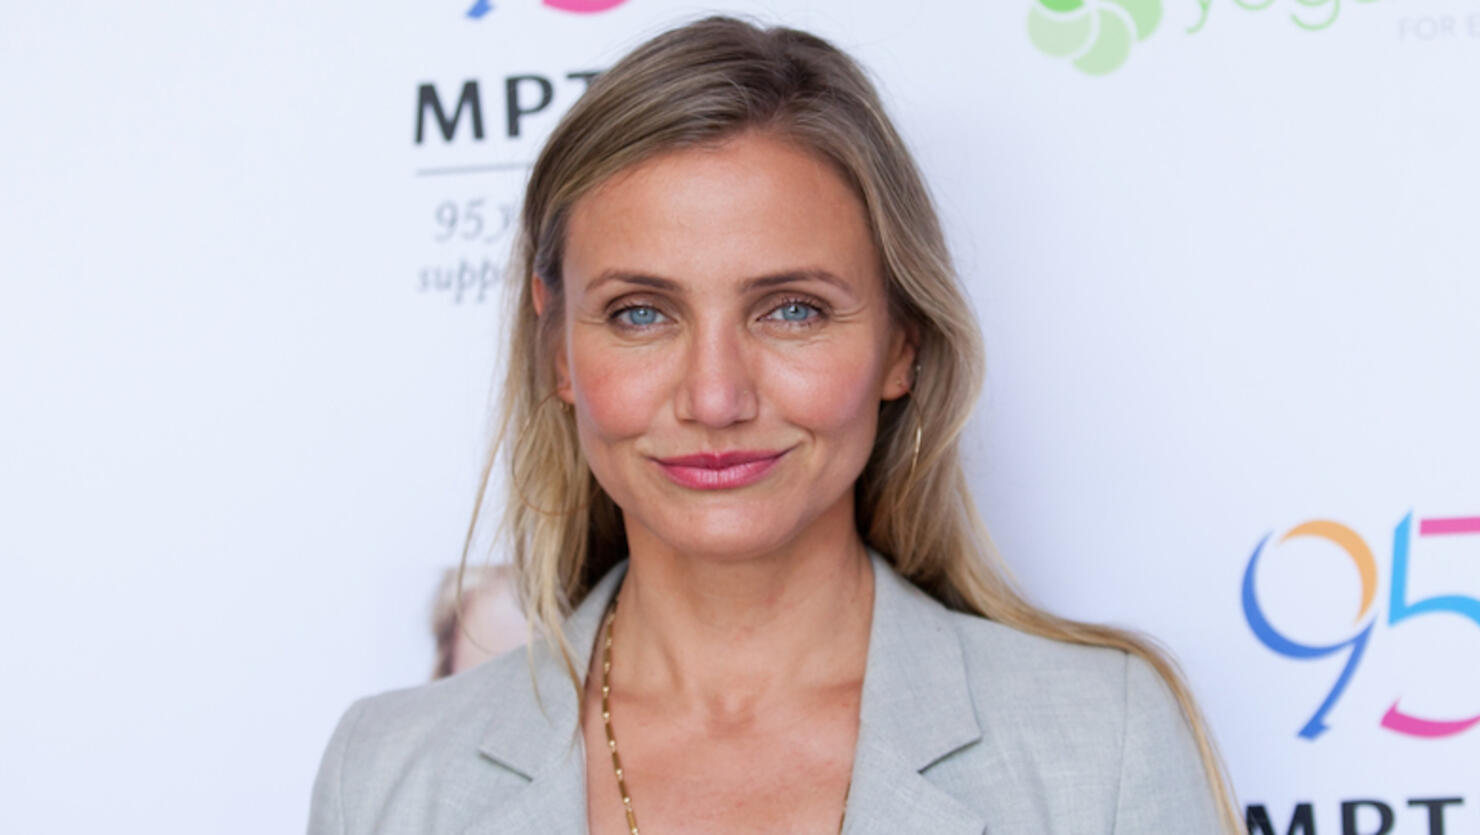 Because Age Is A State Of Mind: Cameron Diaz Joins MPTF To Celebrate Health And Fitness